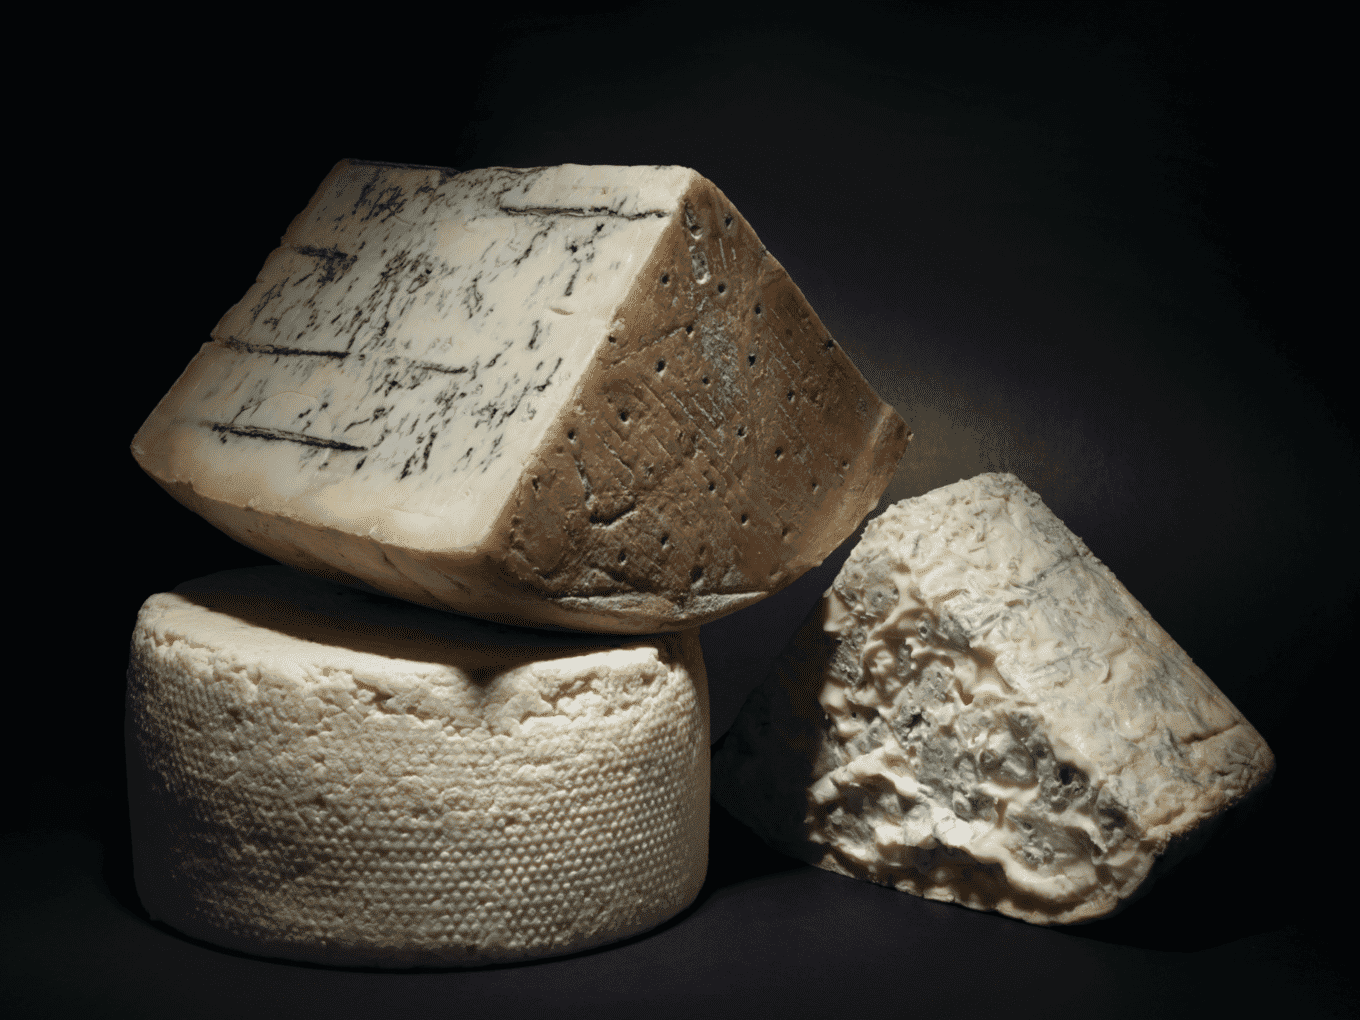 What is the Difference in Gorgonzola Piccante and Dolce? – Capella Cheese